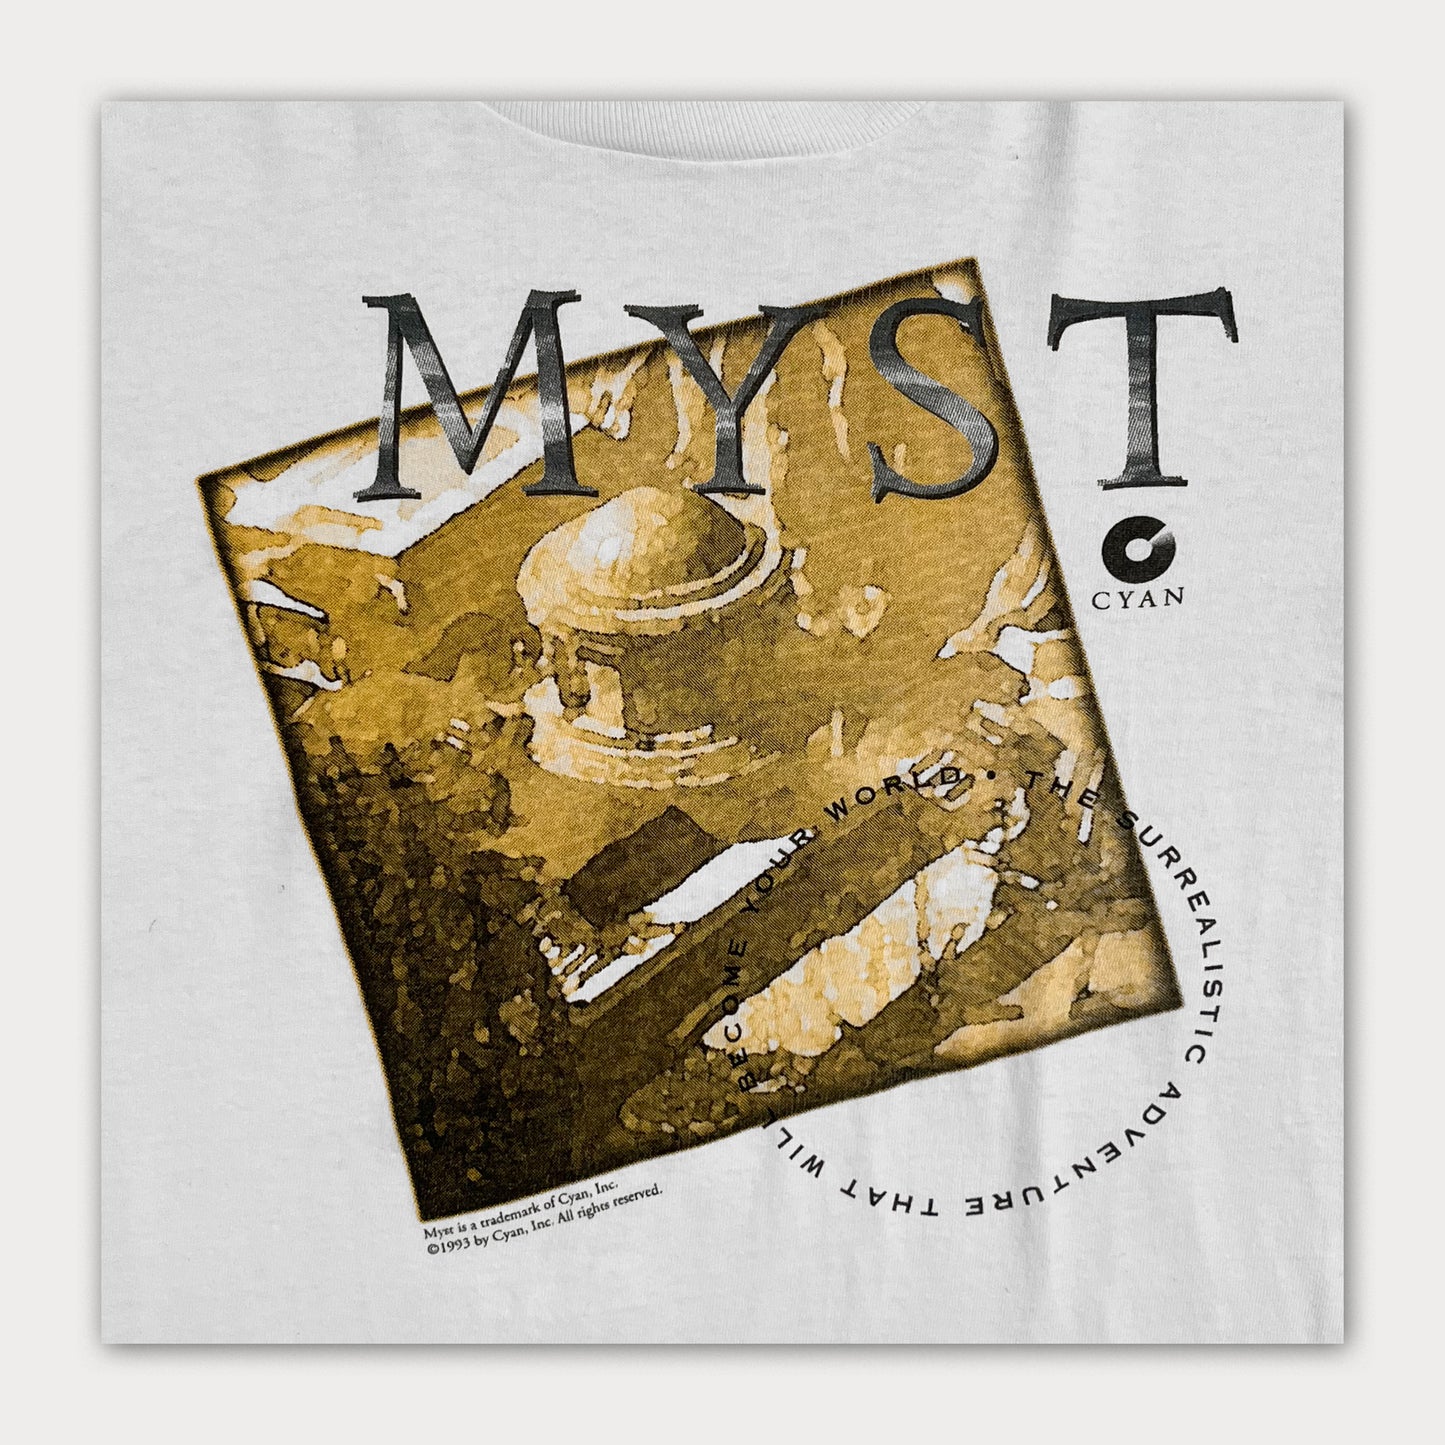 1993 'Myst' Videogame by Cyan Promo Tee